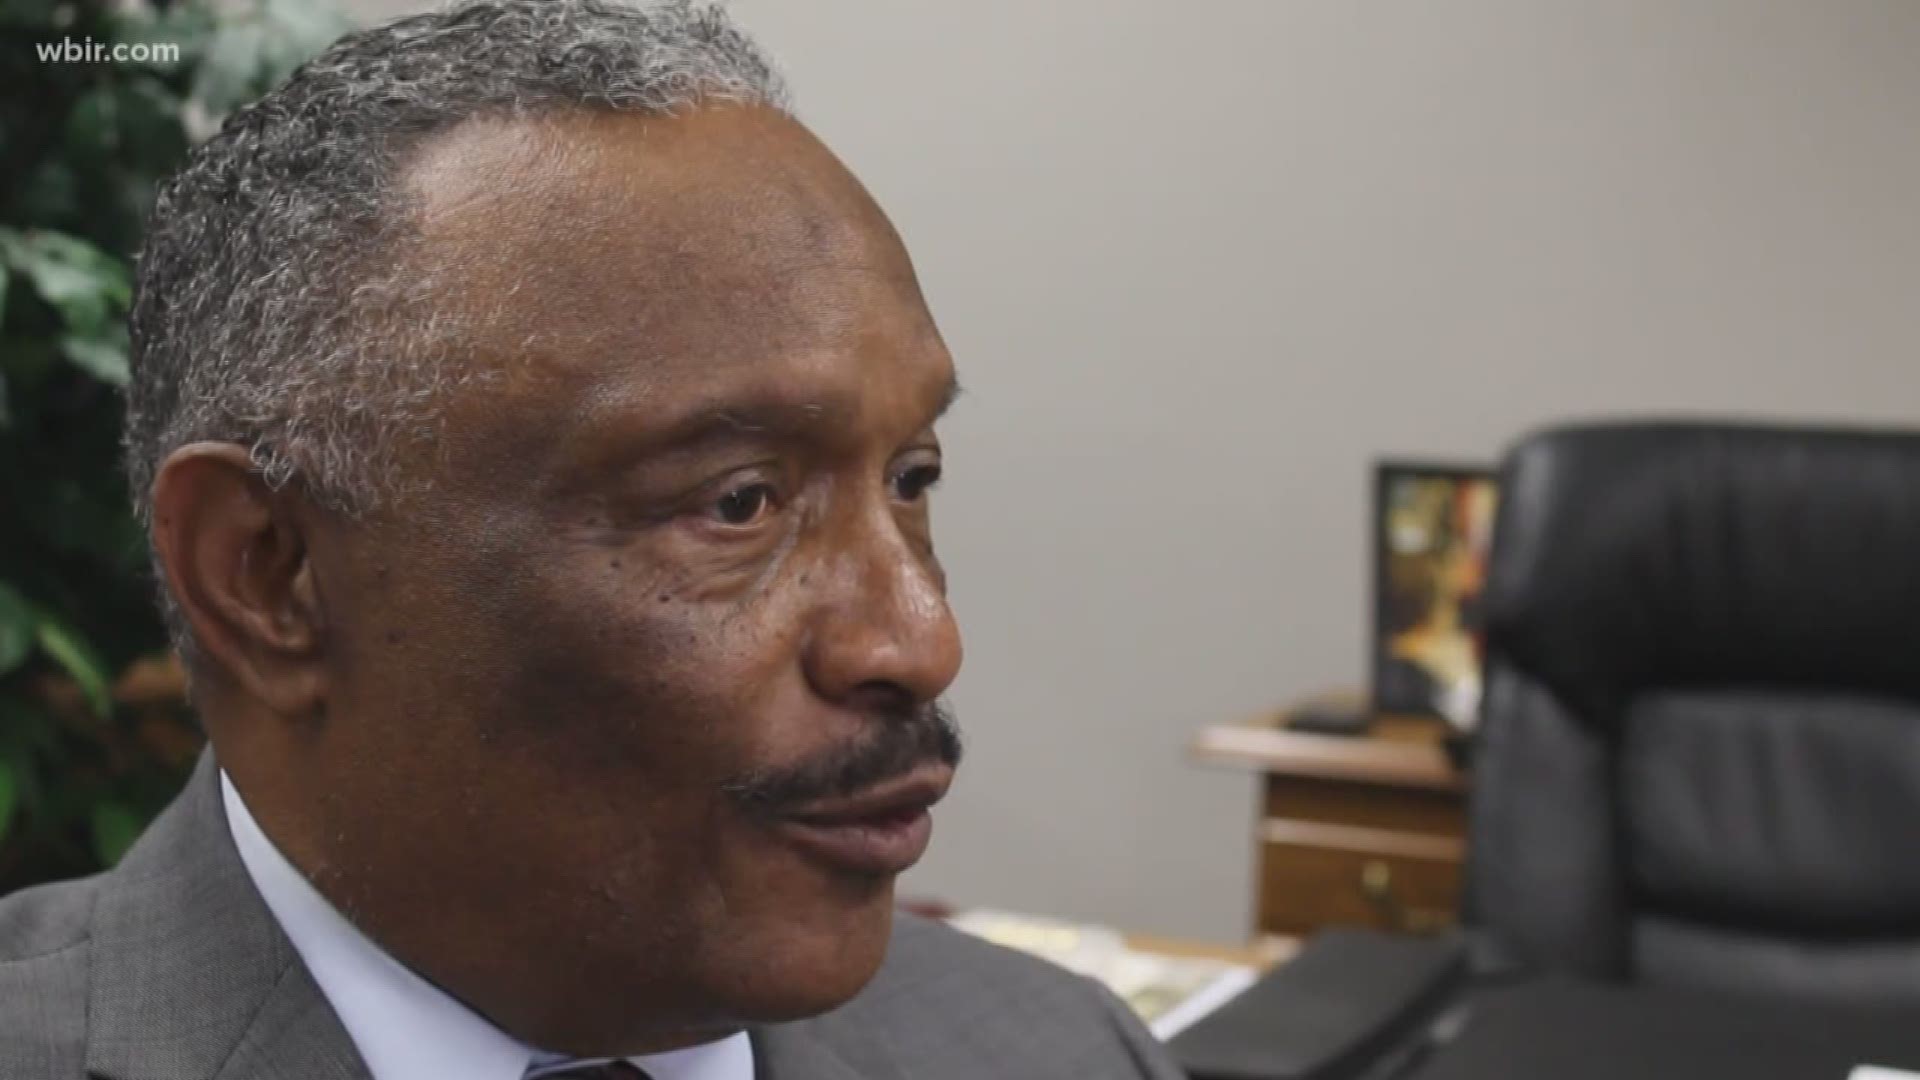 Roland Dykes III is following in his father's footsteps--- he was Newport's 1st black mayor.  He believes Newport, a town that 93 percent white, is the only county in East Tennessee to have elected two black mayors.